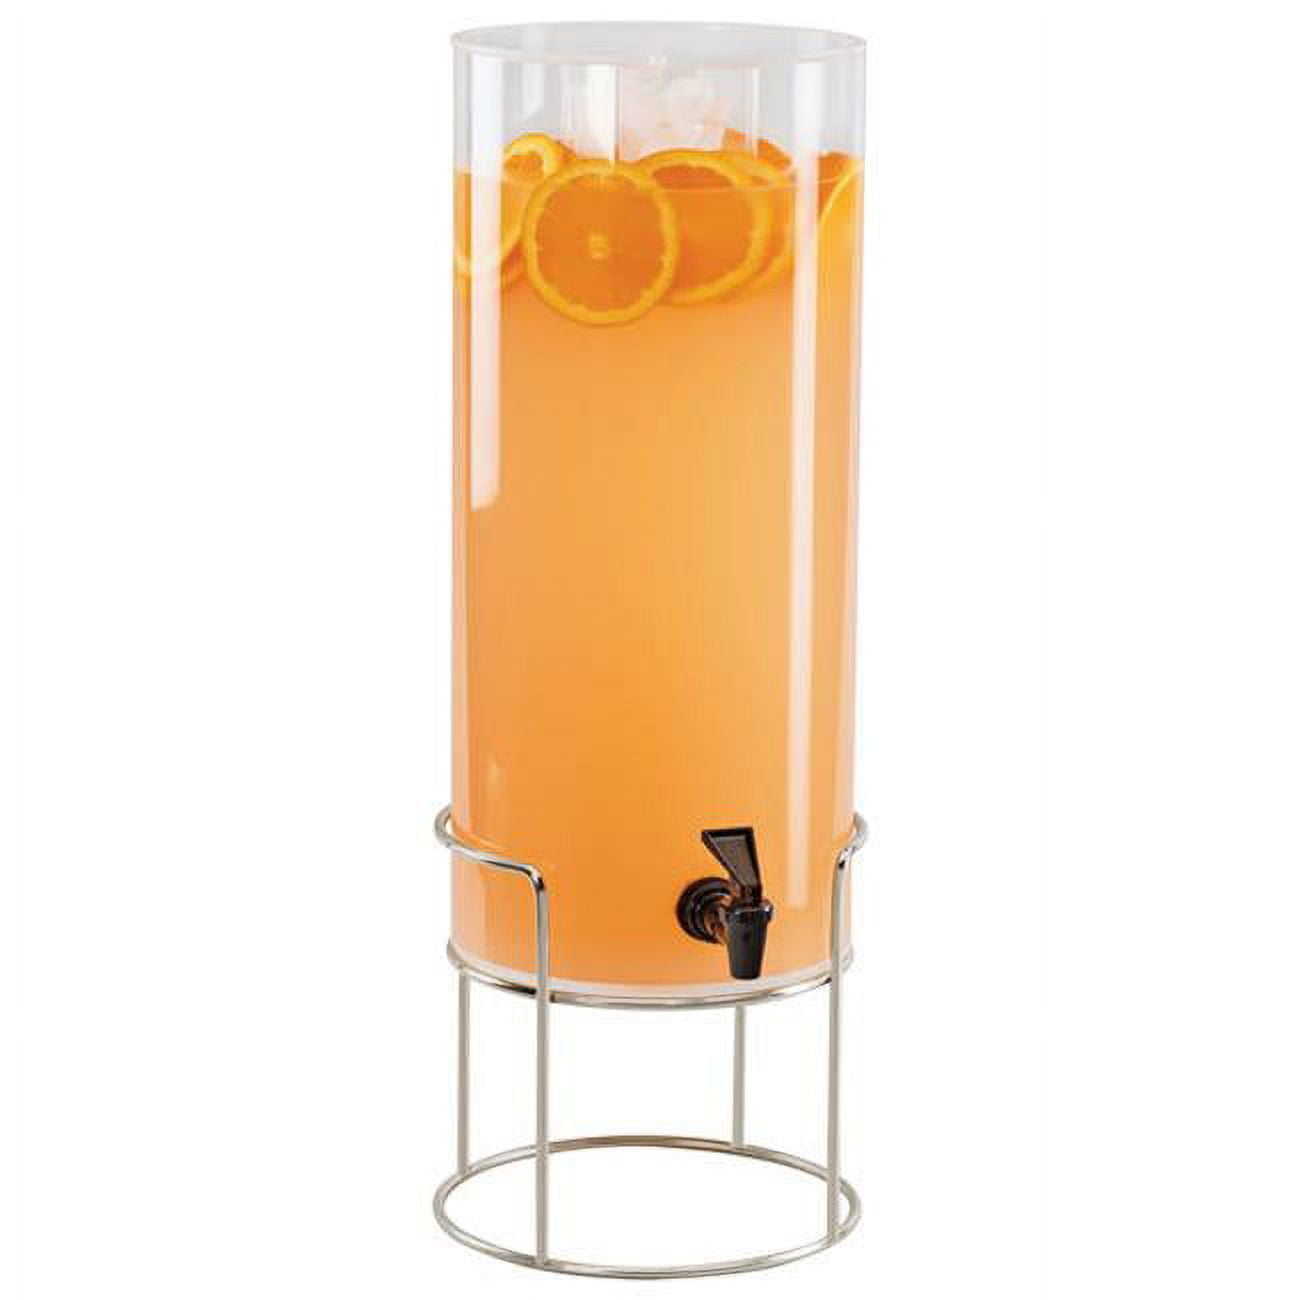 22005-3-49 3 Gal Round Beverage Dispenser With Ice Chamber - Metal Base, Chrome - 8.125 X 9.75 X 25.75 In.